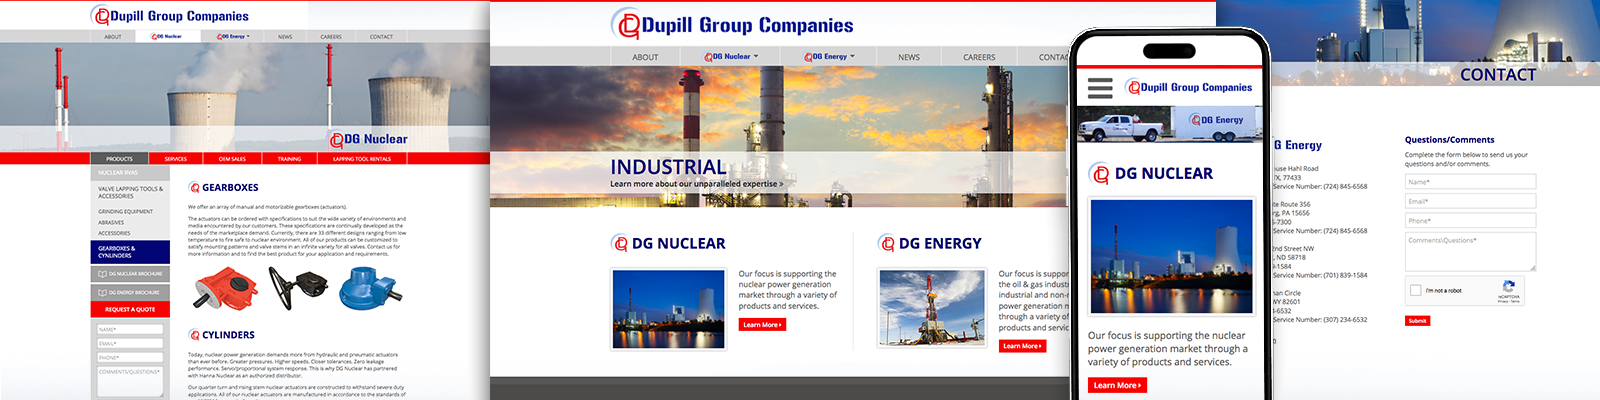 Dupill group